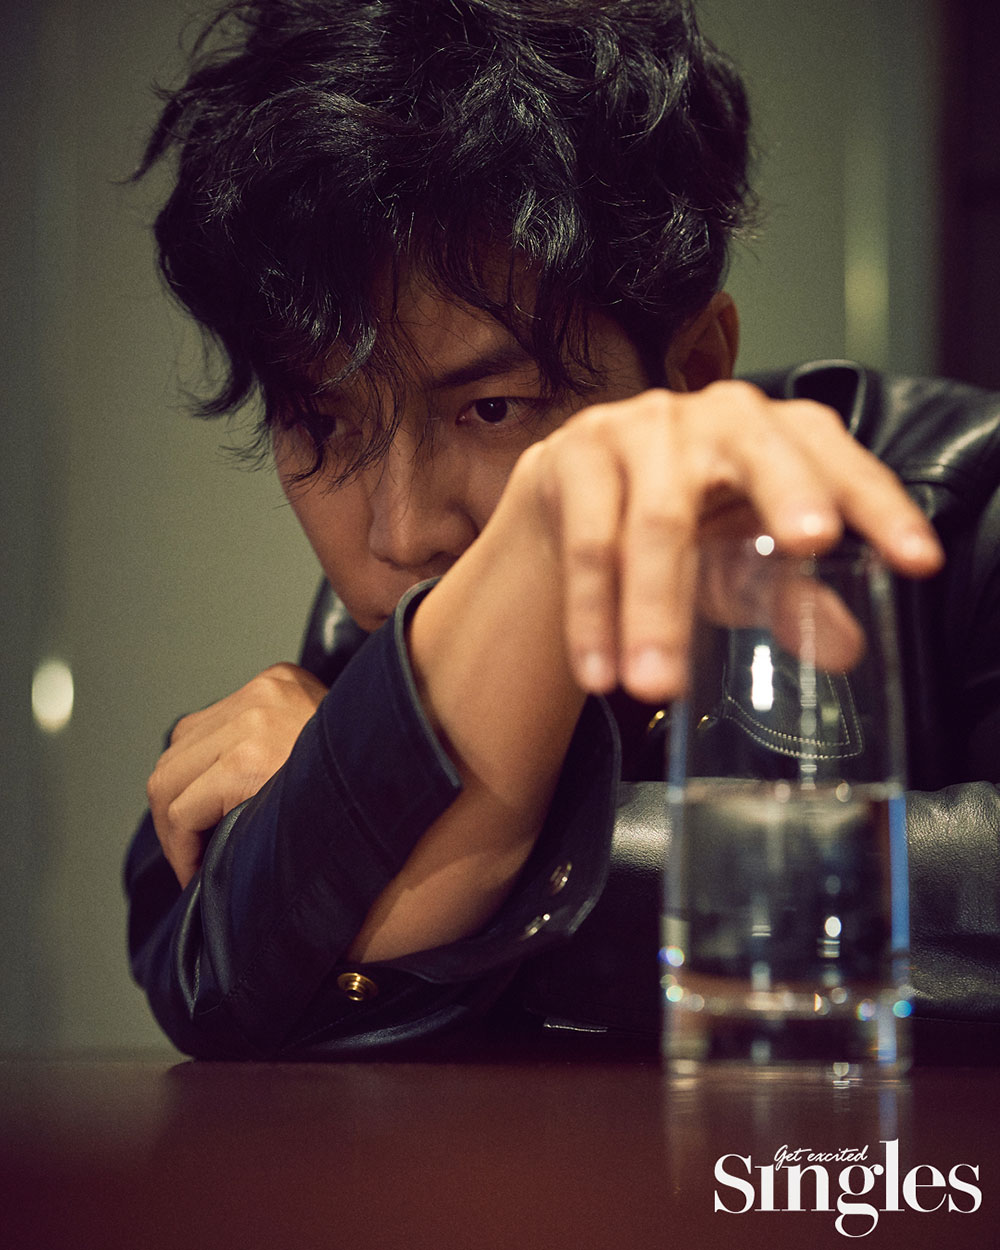 Singles has released a charismatic picture of Actor Lee Seung-gi, who is well received by viewers as Cha Dal-gun in the SBS drama Vagabond, which caught both ratings and topics.In particular, this picture featured the cover of the December issue of Singles.In this picture, Actor Lee Seung-gi is the back door that led the atmosphere of the filming scene by overwhelming Sight with charismatic eyes that feel rough charm like Cha Dal-gun in Vagabond who fights to find the truth against huge power.It is no exaggeration to say that the fact that the Chadalgeon in the Vagabond, which is not likely to exist in this world, fighting against the great power over the unfair death of Lee Seung-gis beloved nephew, who has brought authenticity to the character of Chadalgeon with a constant straightness, can be seen realistically thanks to the power of Actor Lee Seung-gi.Lee Seung-gi, who has built his own world without causing noise for 15 years since his debut, persuaded viewers by infusing authenticity to the character of the drama.He said, Actor, who has an image that can make him believe in Chadalgans ignorant justice and behavior, was thought to be Lee Seung-gi, and the bishop chose me.In order to meet these expectations, I focused on the Feeling of a person named Cha Dal-gun as a human being and acted. Lee Seung-gi, who said that he was able to confirm his own act in Vagabond after a year of shooting Lee Seung-gis Engine of Youth, a self-esteem pre-production drama that he wanted to do well, said, I saw my act in an objective Sight.There were scenes where I regretted seeing things that I believed to have done well.I think I am right, and I am going to be more humble because it is a time when things that I believed were changed or changed. What is the Engine of Youth that made Lee Seung-gi move like this? It seems to have been self-esteem to do anything well.I think theres a strong point in how I want to prove to people who dont want to be ignored by others, want to be praised, and trust me, he said.Lee Seung-gi, who has already achieved a lot as an entertainer, has been enjoying the value, happiness song, act, progress, and entertainment that he values most in life, and is satisfied with the goal he wants to achieve more, I think it is still less filled, but I want to do it for a lifetime.The value that is most precious in life is happiness, so I do not have to do a little job, but I seem to be living hard and thinking endlessly about what happiness is. Someone who can be a milestone for someone, Lee Seung-gis path is not bad.Actor Lee Seung-gis interview with the picture that I want to remain as an inspiration for Lets do it can be found in the December issue of Singles and mobile.Photo = Singles